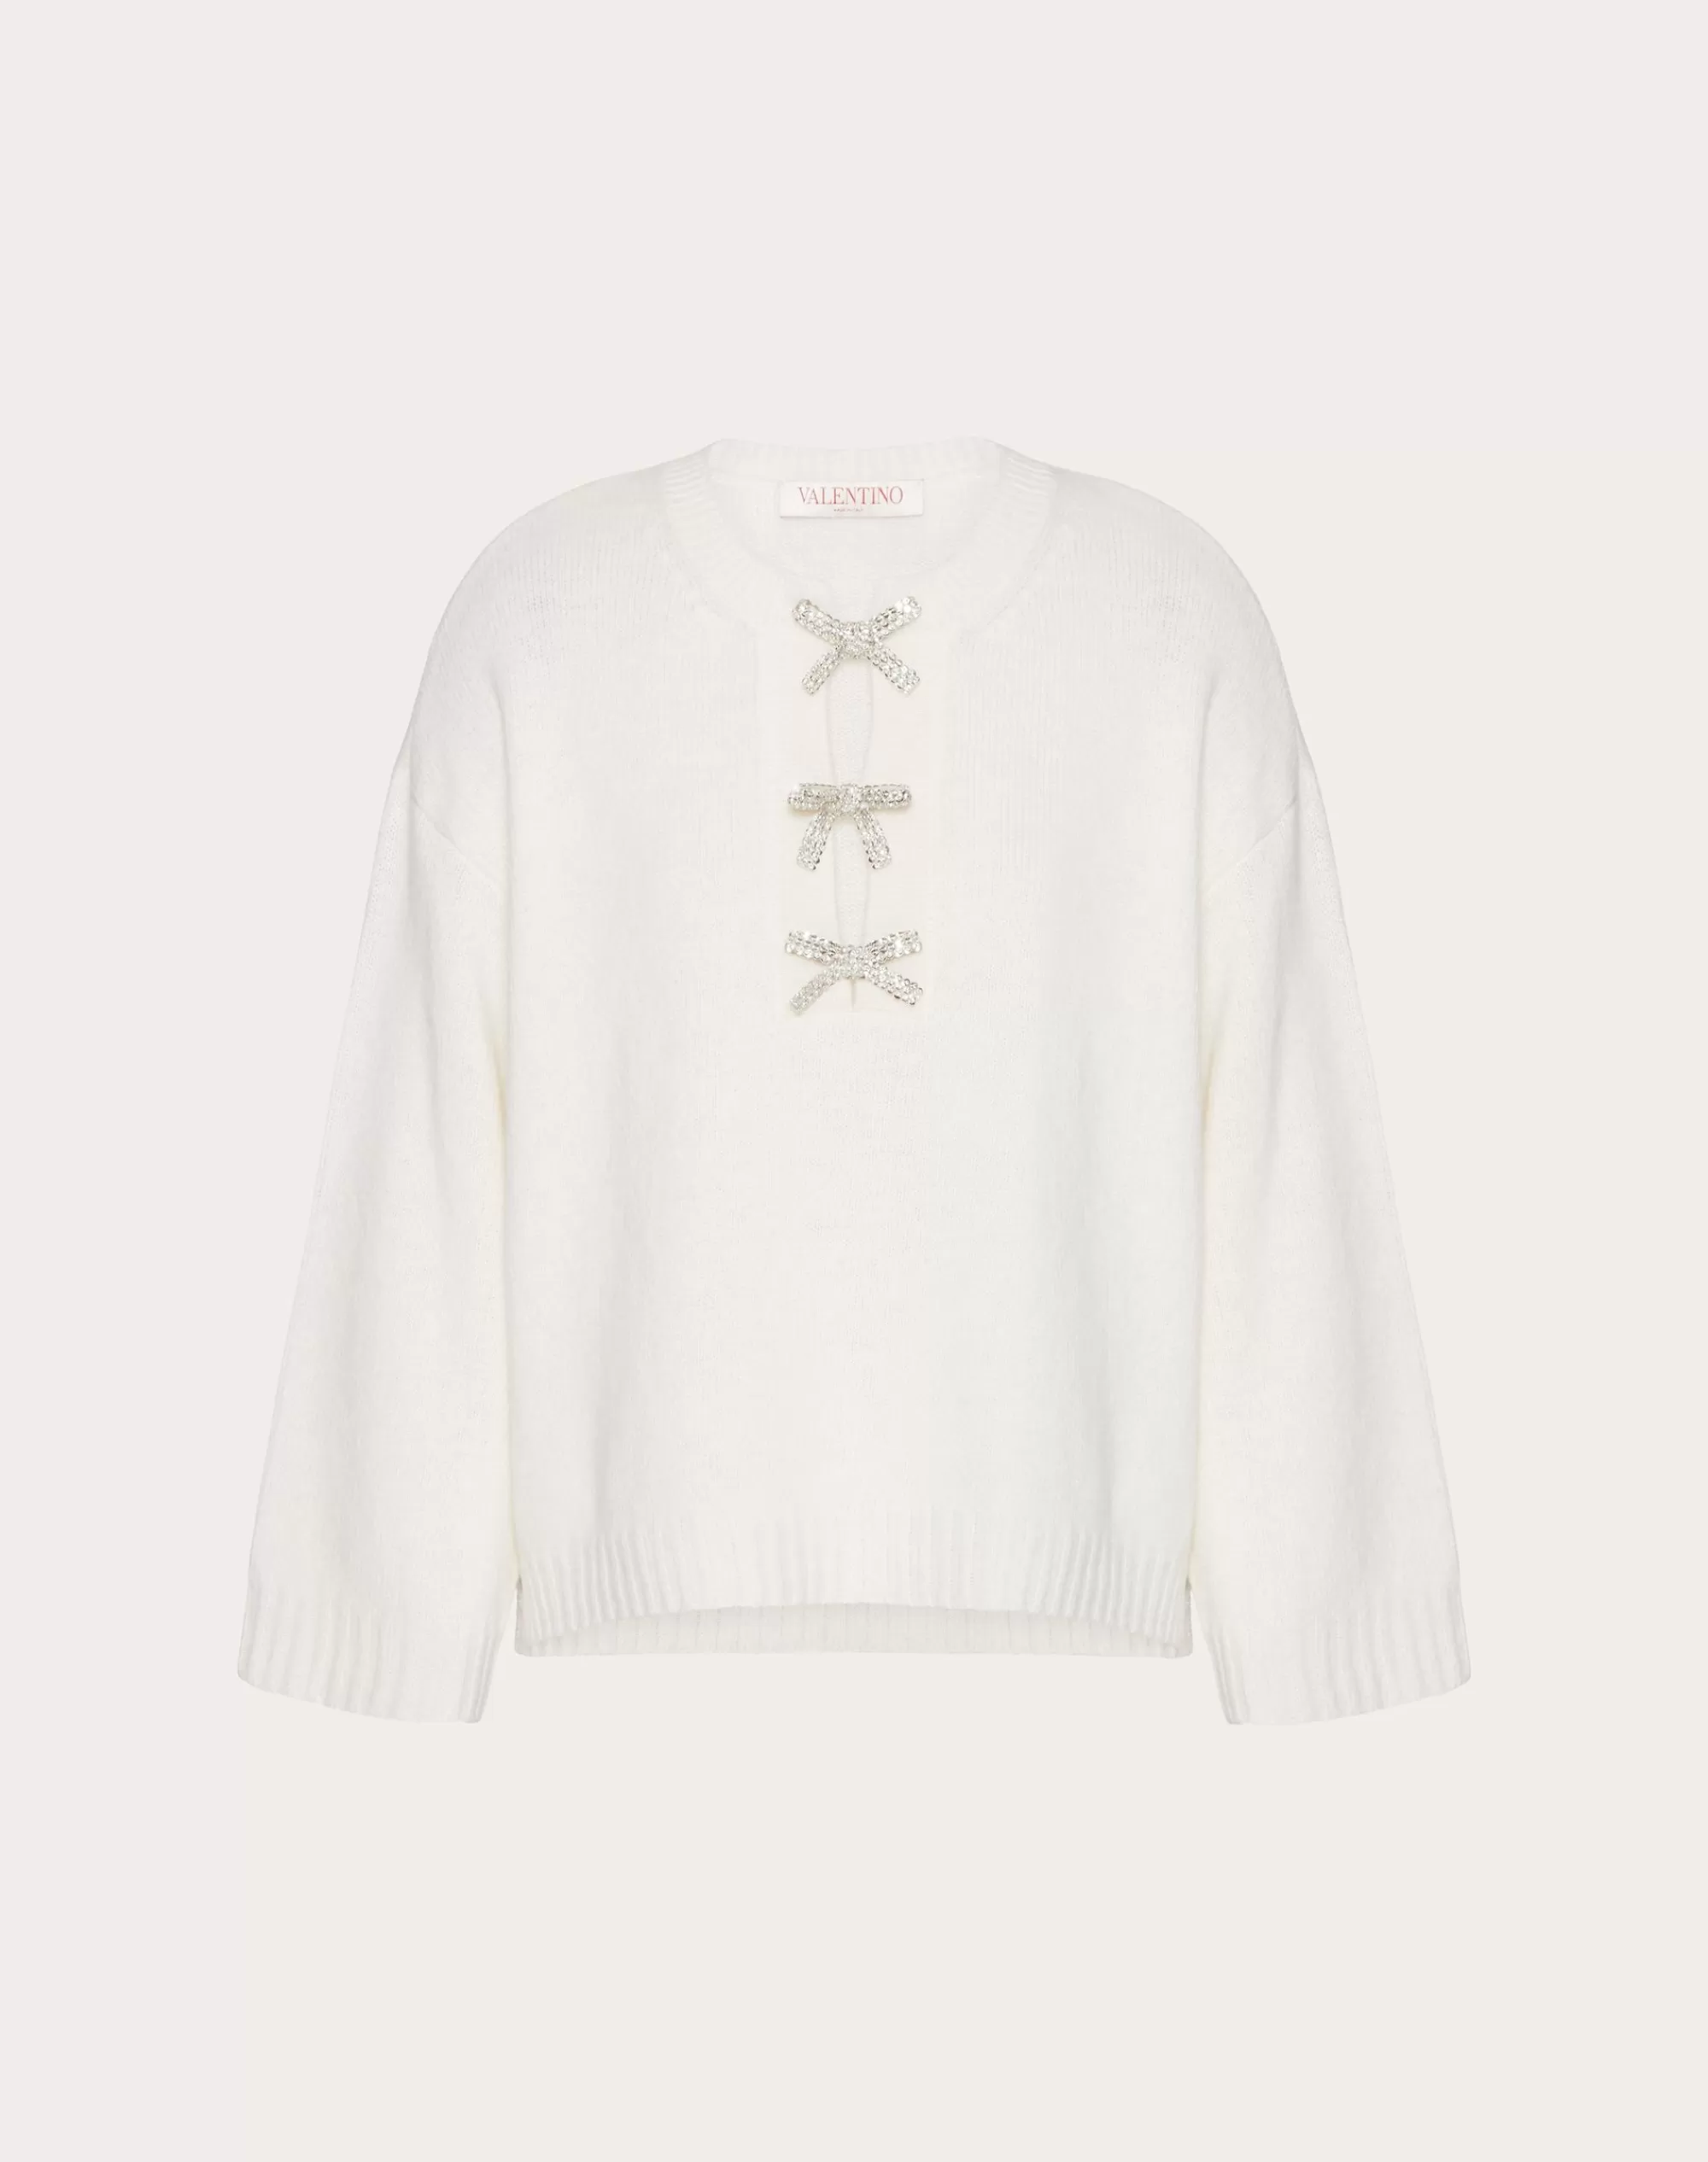 Valentino EMBROIDERED WOOL SWEATER Ivory/silver Cheap